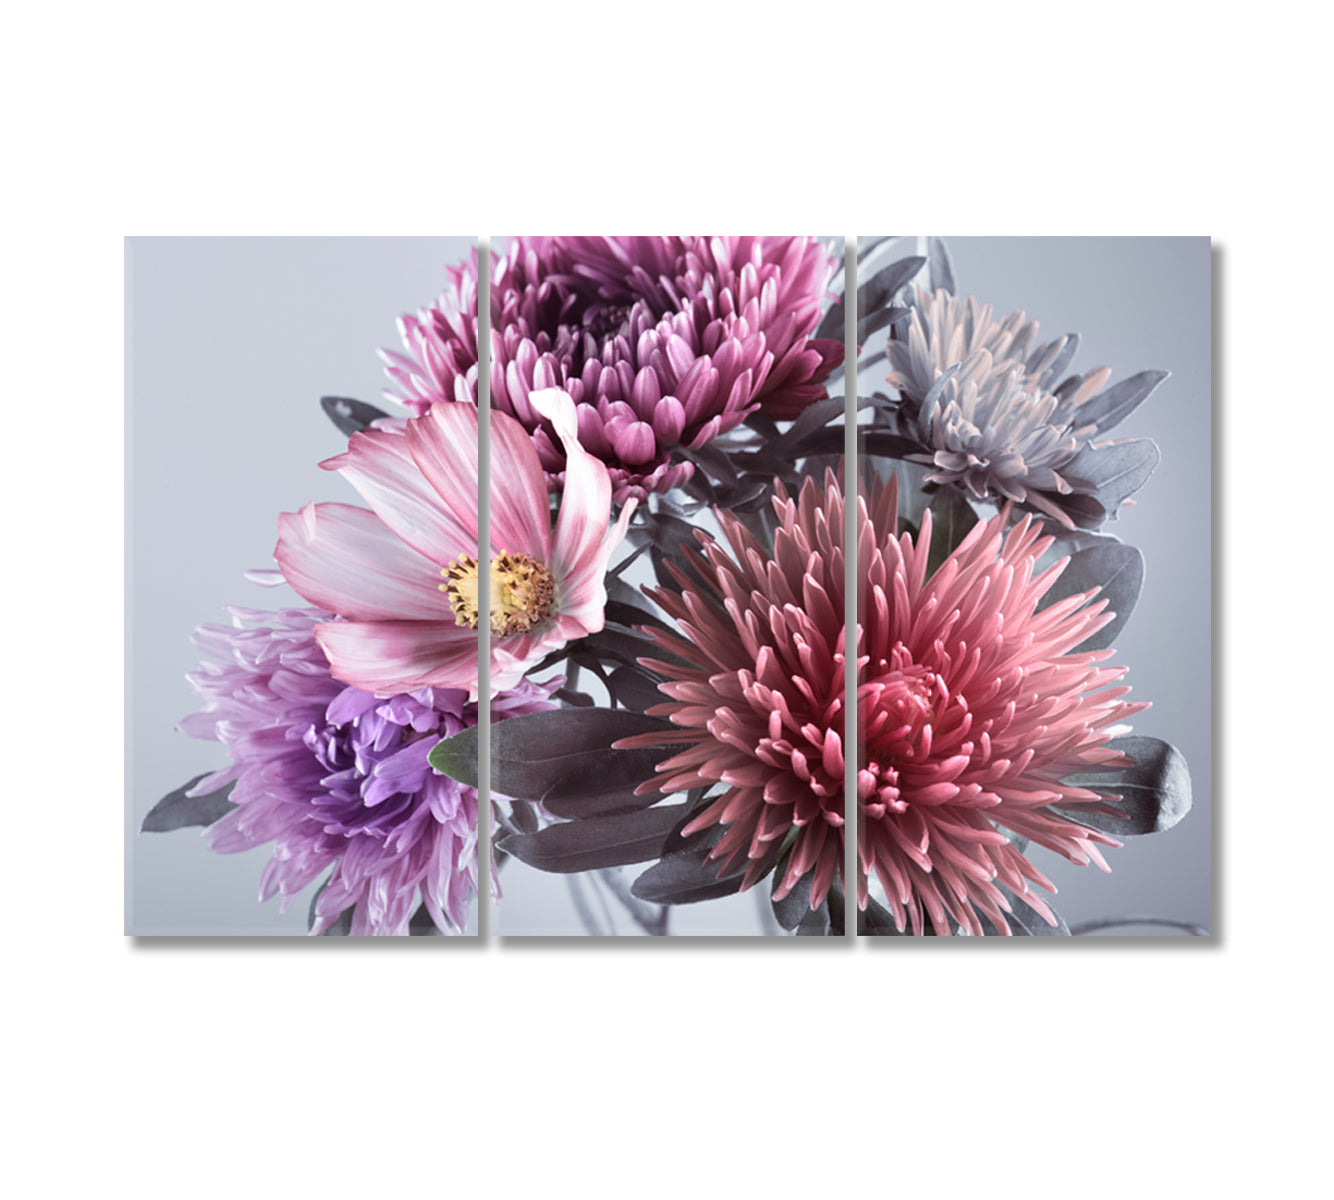 Purple Asters Flowers Art For Home-Canvas Print-CetArt-3 Panels-36x24 inches-CetArt